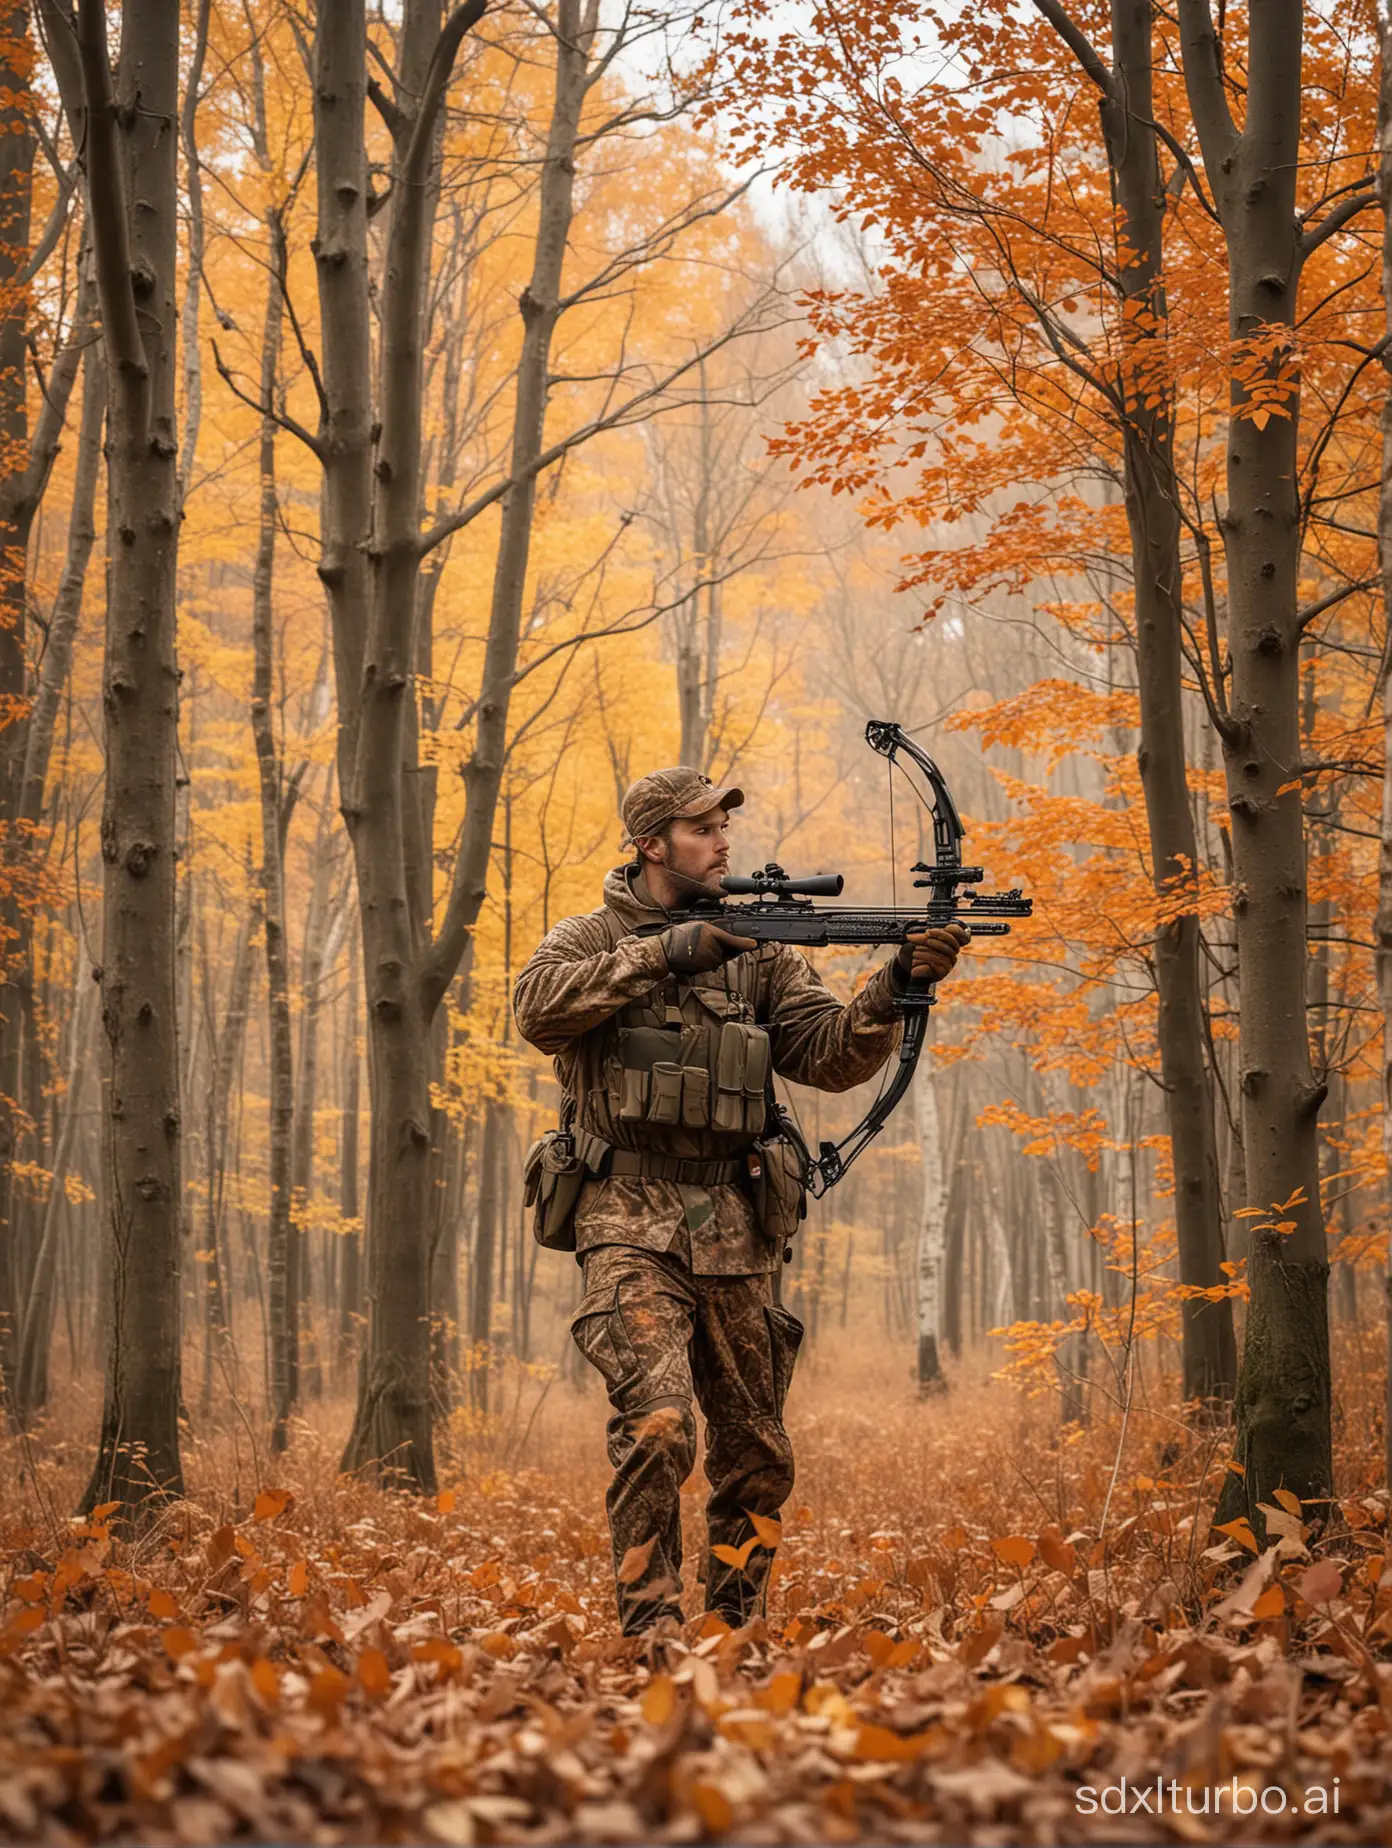 A man in a heavily camouflaged outfit, peeking on top of a hill in an autumn forest. He is carrying a compound bow, aiming at a deer in the distance. The scene captures the vibrant colors of autumn with red, orange, and yellow leaves scattered around. The man is mostly obscured by the tree, with only parts of his camouflaged gear visible, blending into the surroundings. The deer is alert, standing in a clearing, surrounded by fallen leaves.